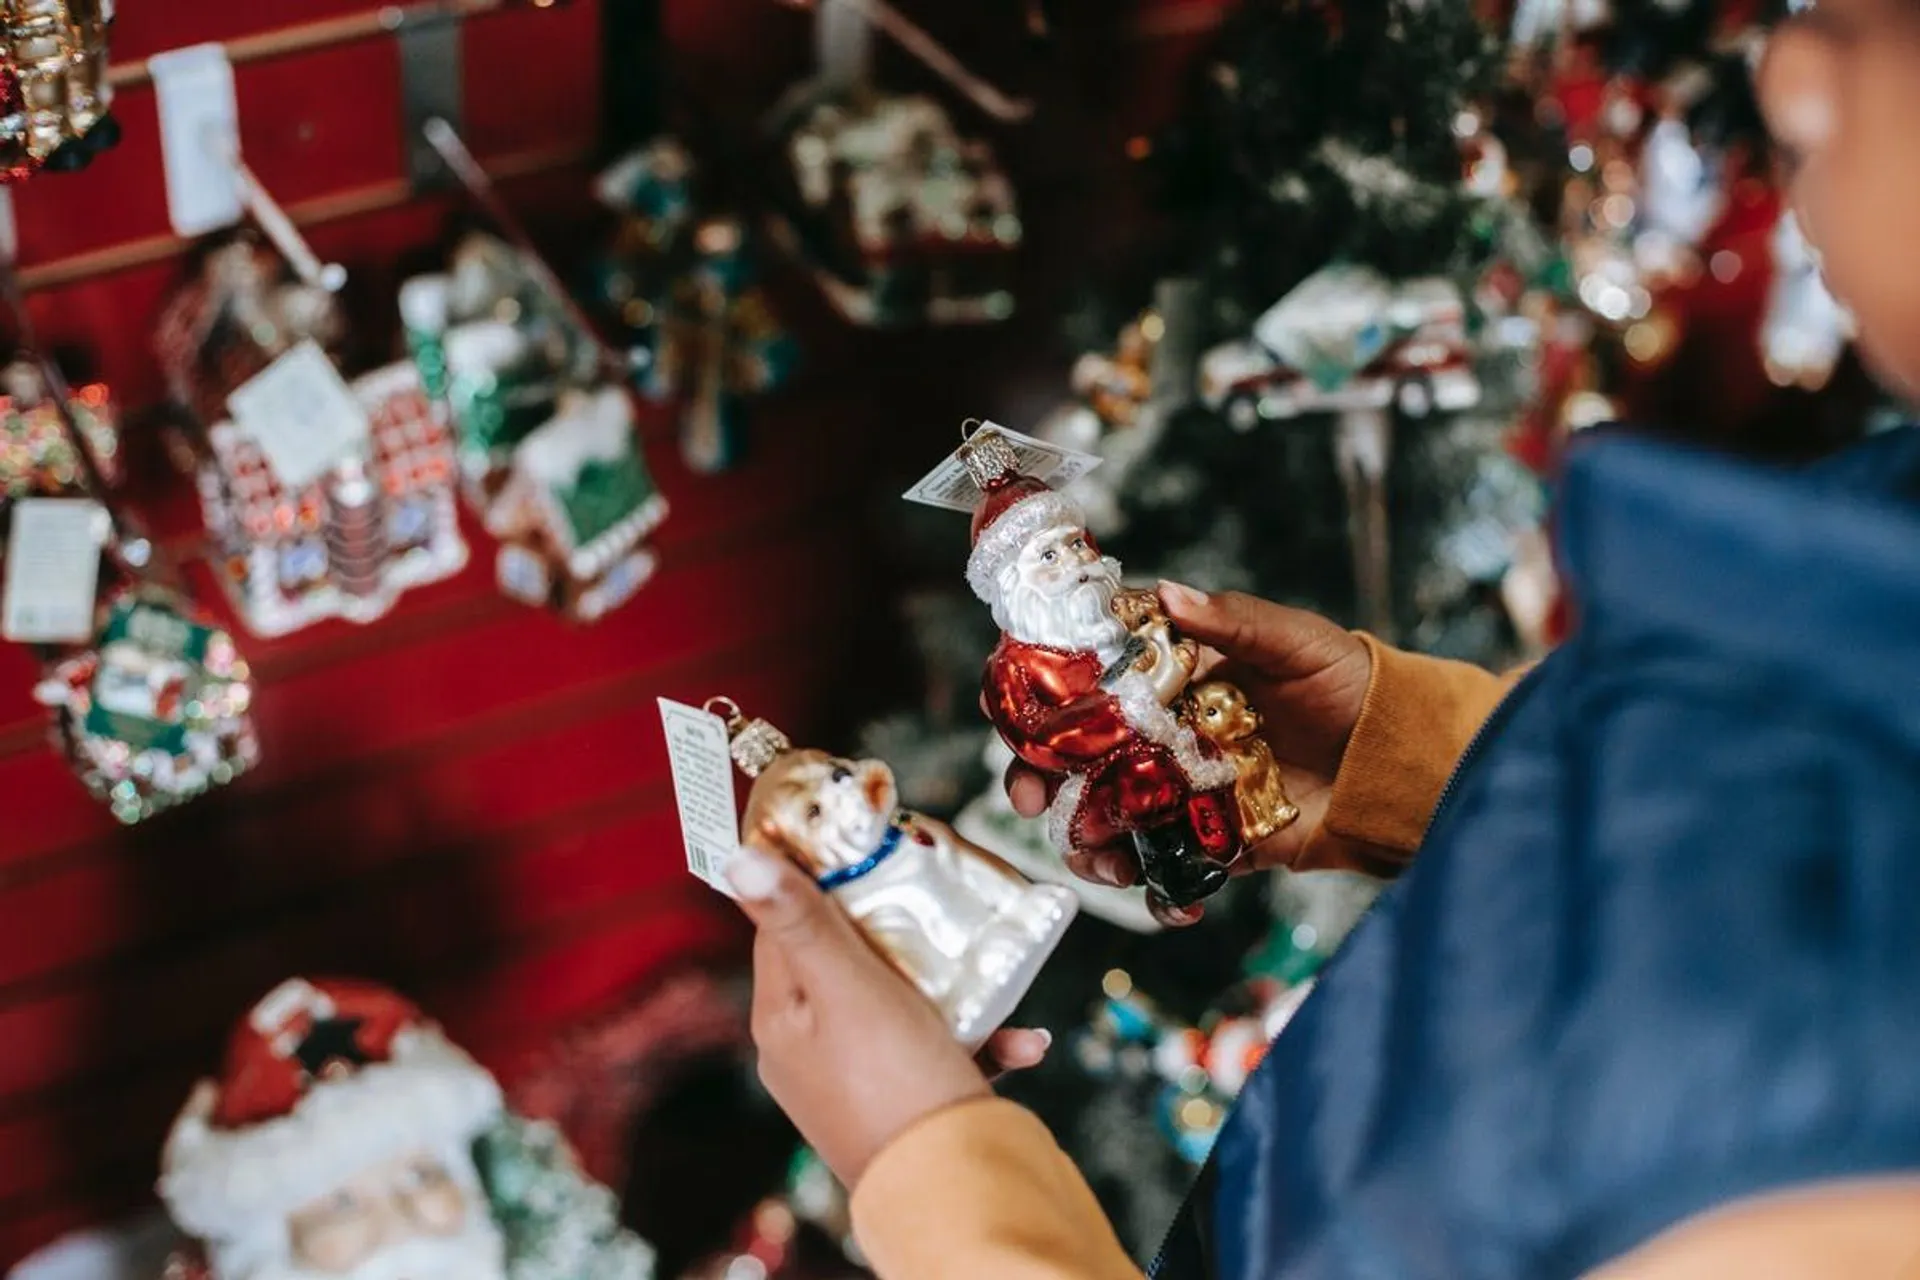 How to get the best gifts for Christmas without breaking the bank